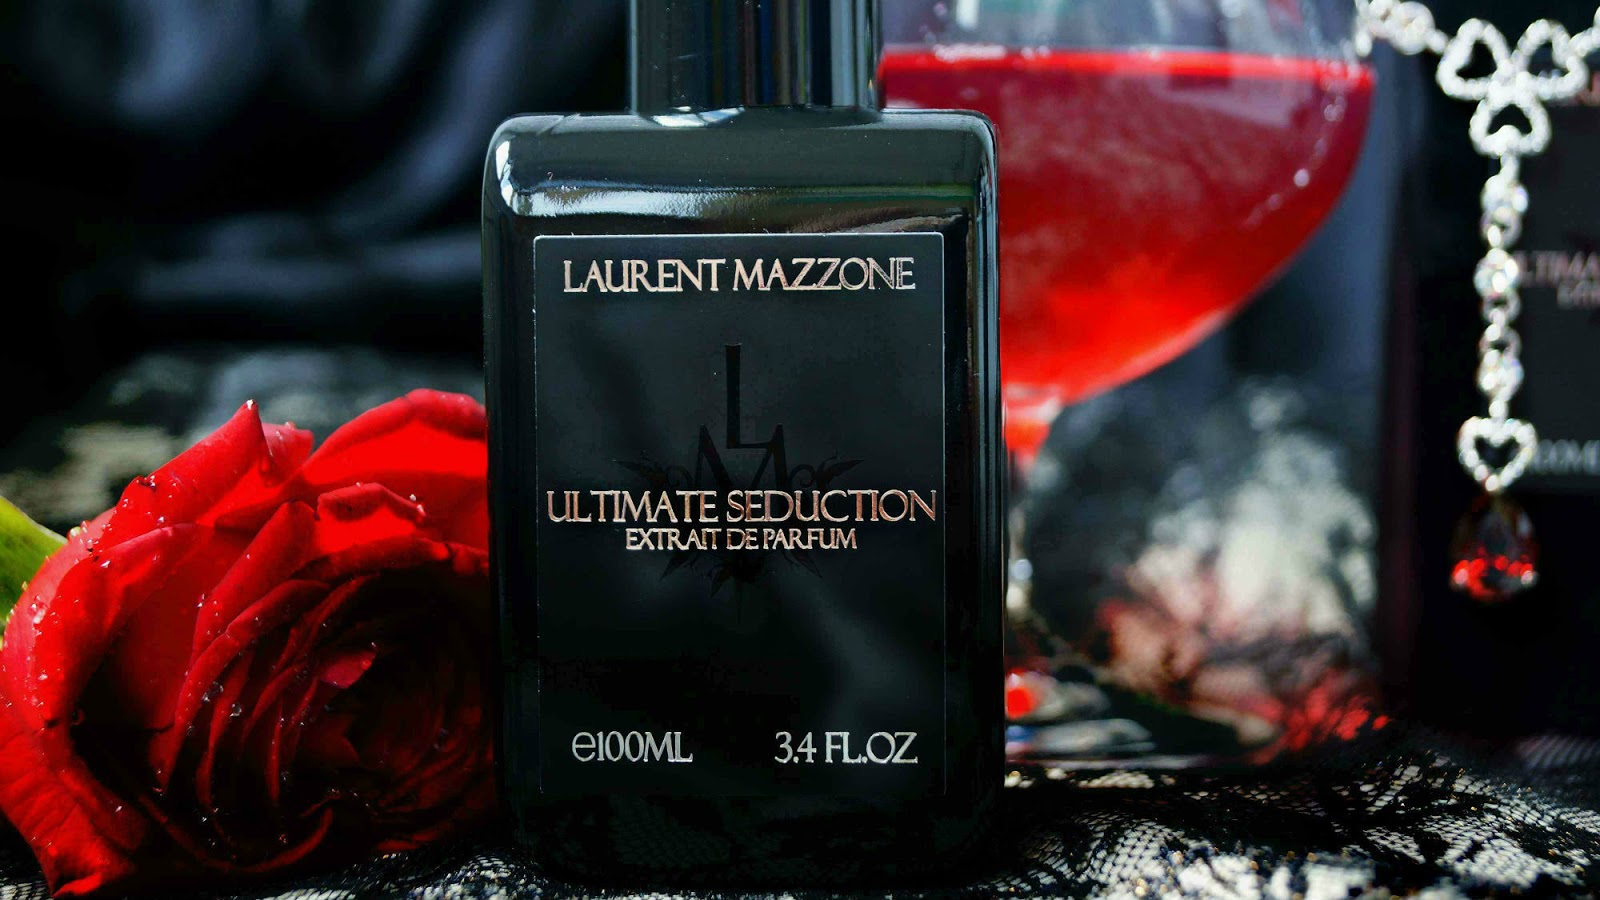 Mazzone dulce pear. LM Parfums Ultimate Seduction. Laurent Mazzone Ultimate Seduction. Парфюм Laurent Mazzone. LM Parfums (Laurent Mazzone Parfums) Dulce Pear.